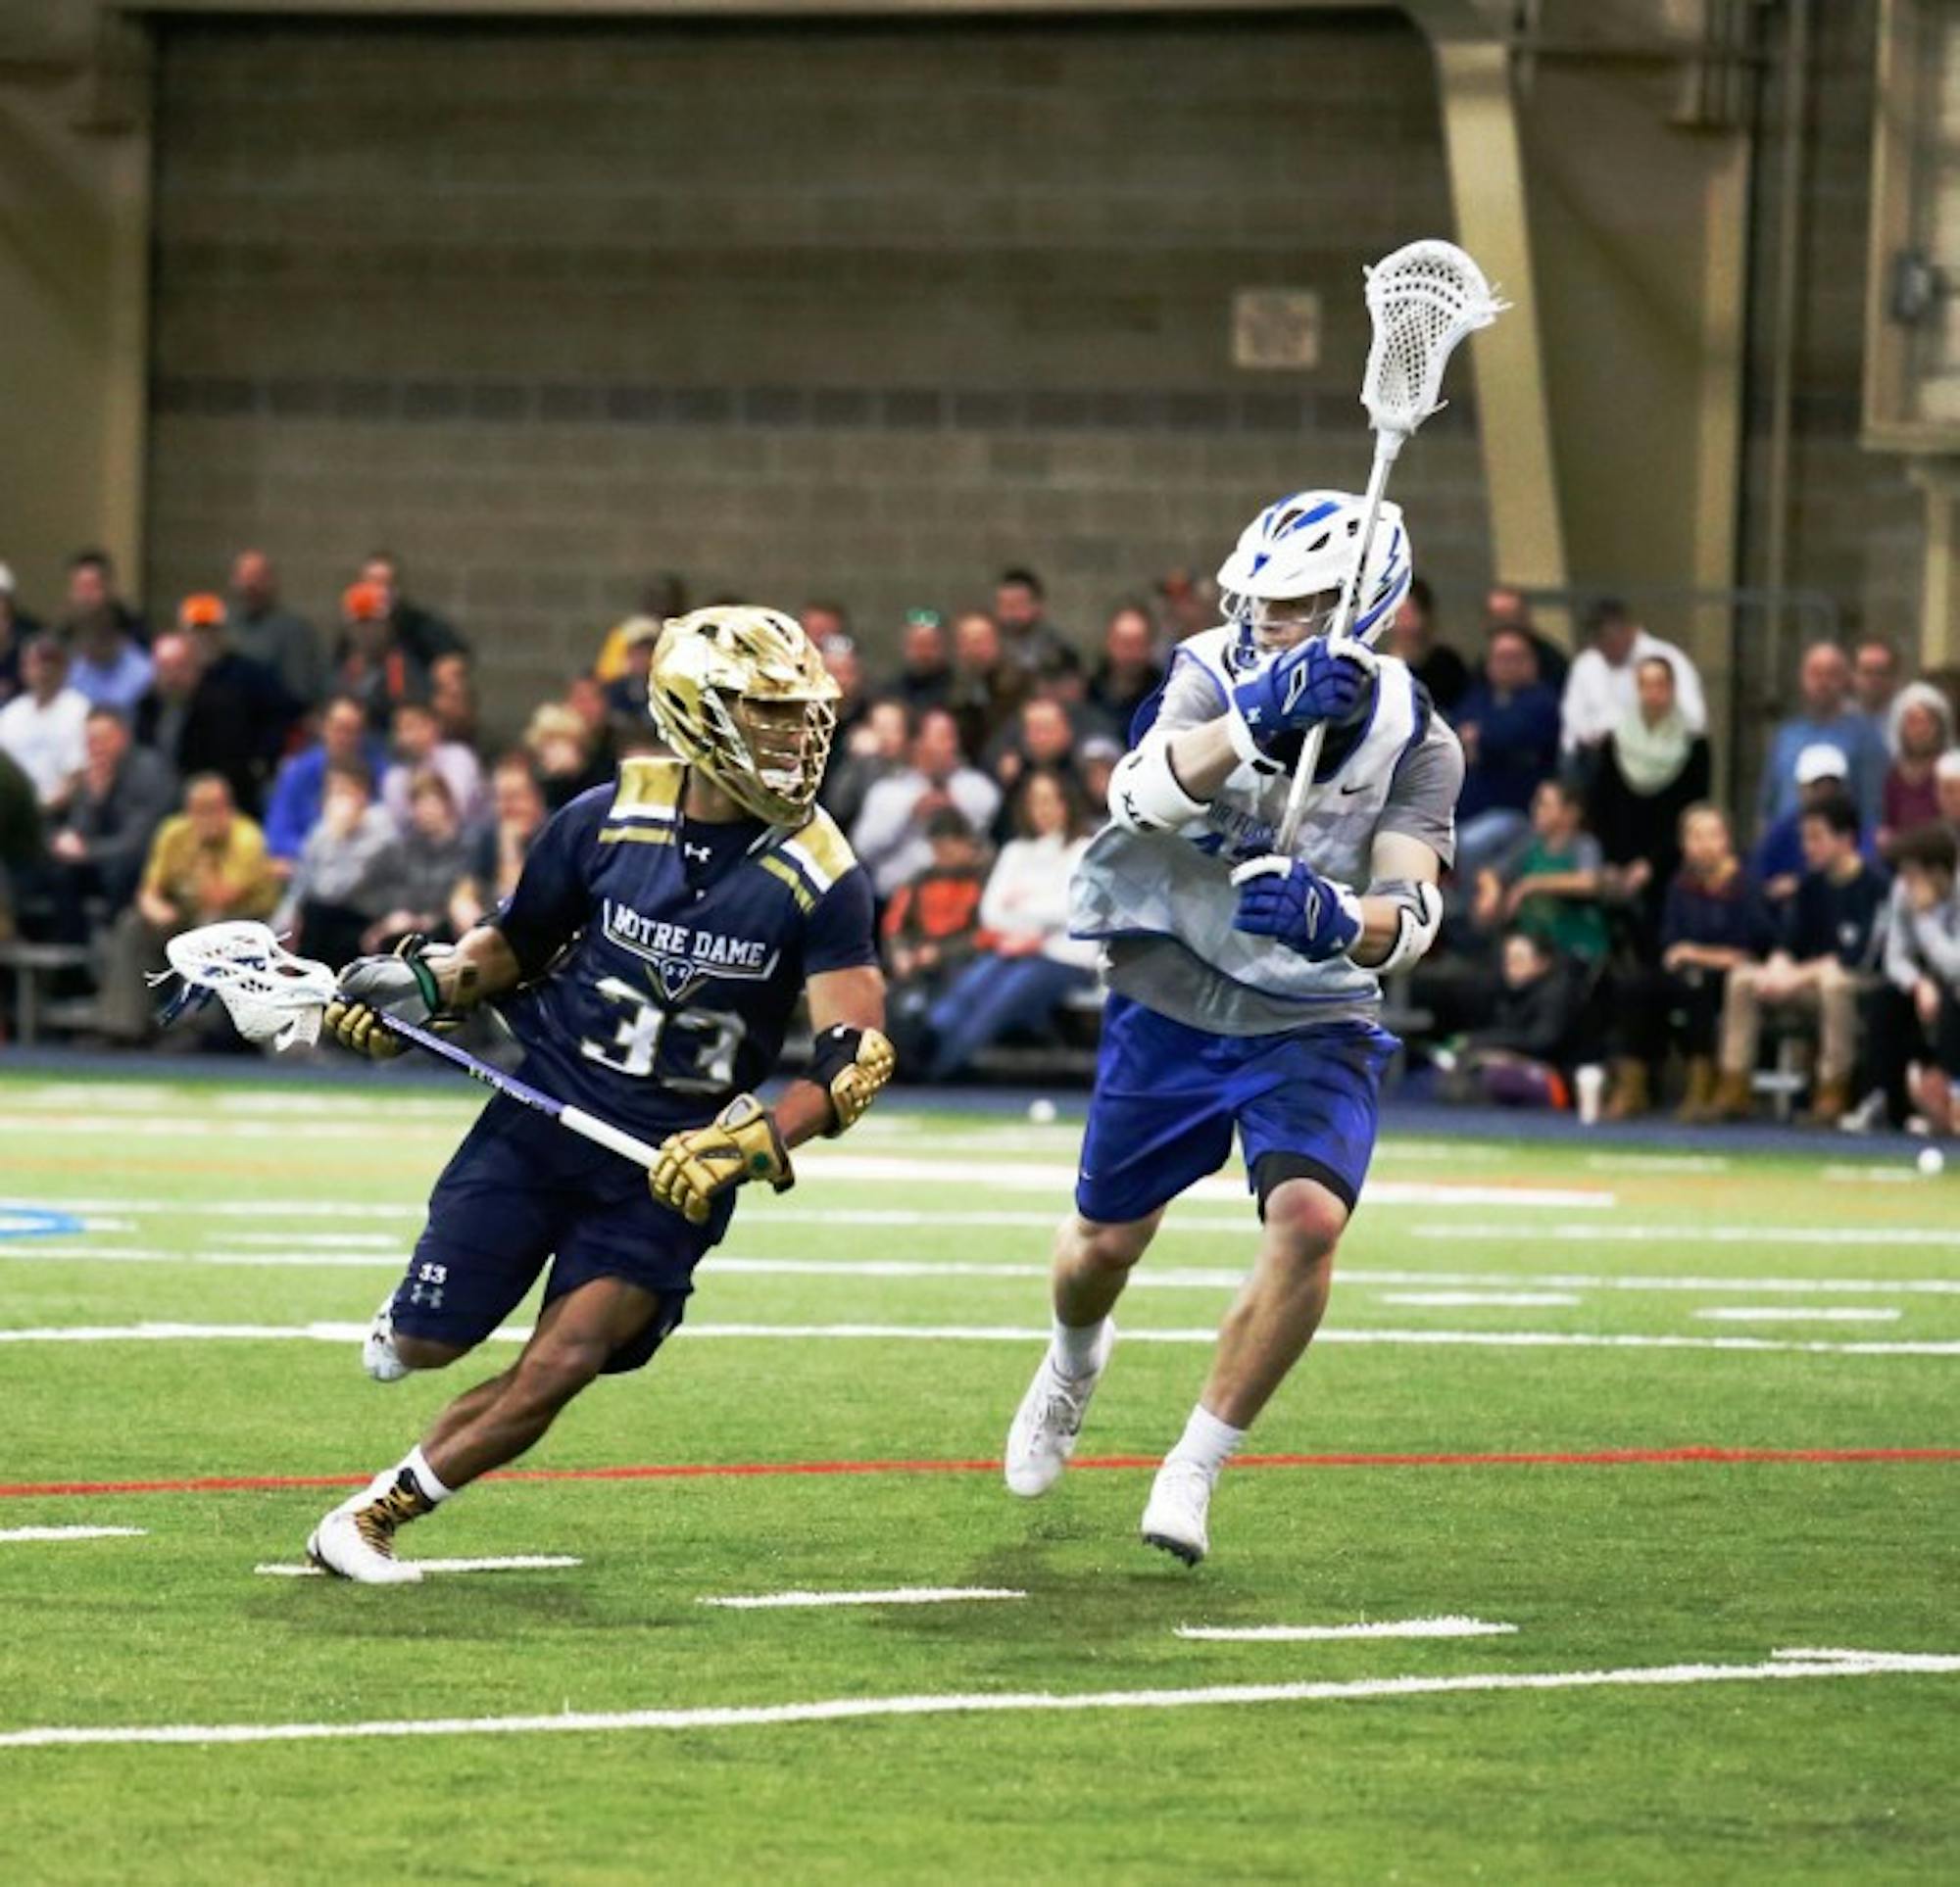 Irish sophomore midfielder Pierre Byrne looks towards the crease during Notre Dame’s scrimmage against Air Force on Jan. 30 at Loftus Sports Center. Byrne scored two goals in eight games last season.